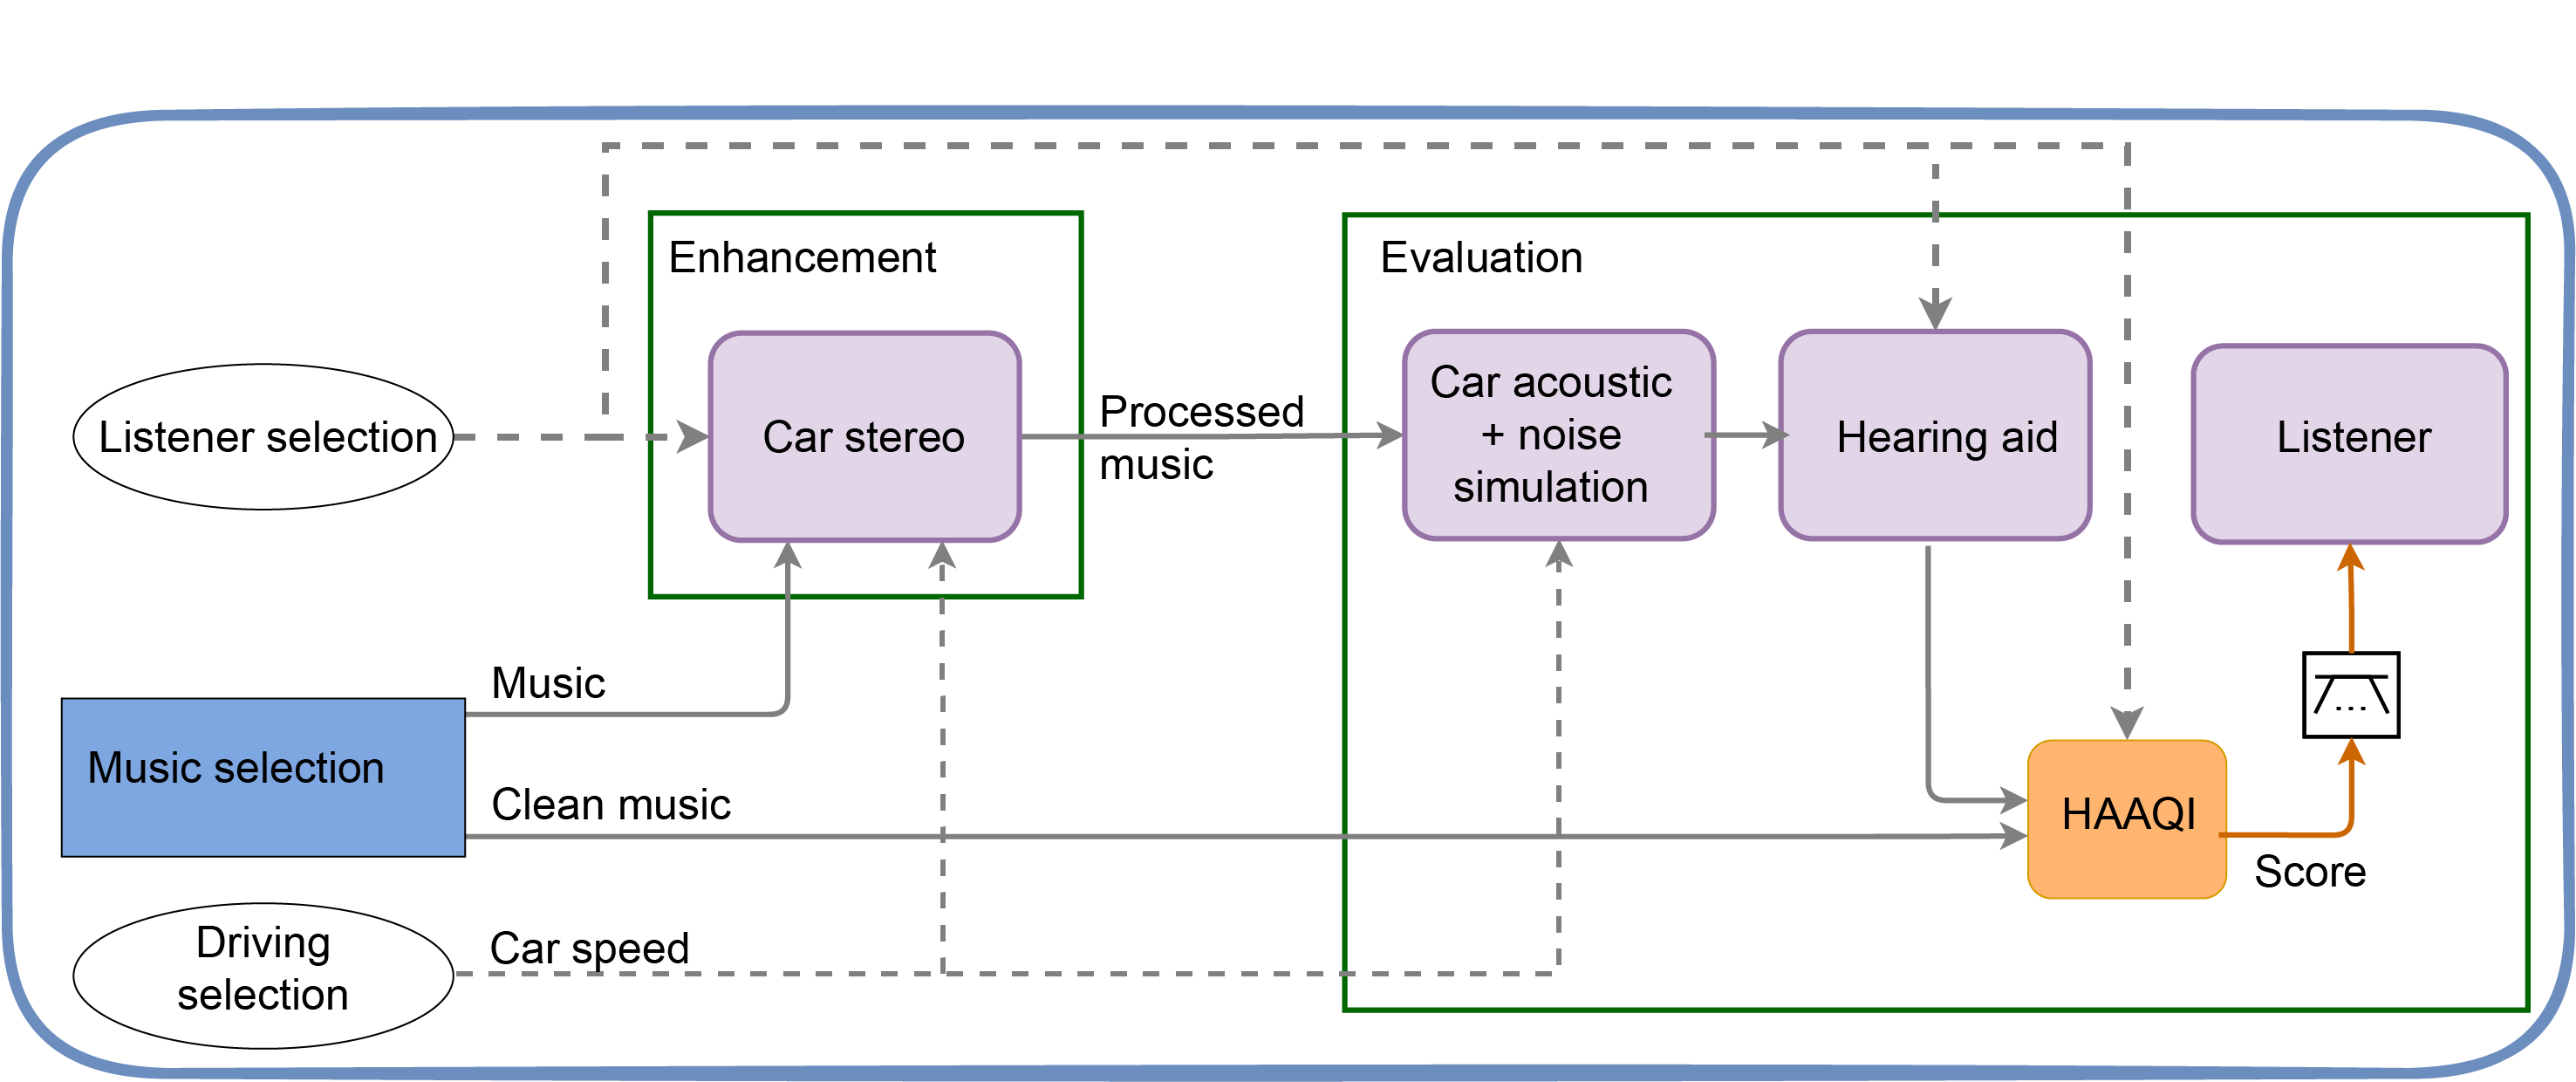 Baseline schematic for car task